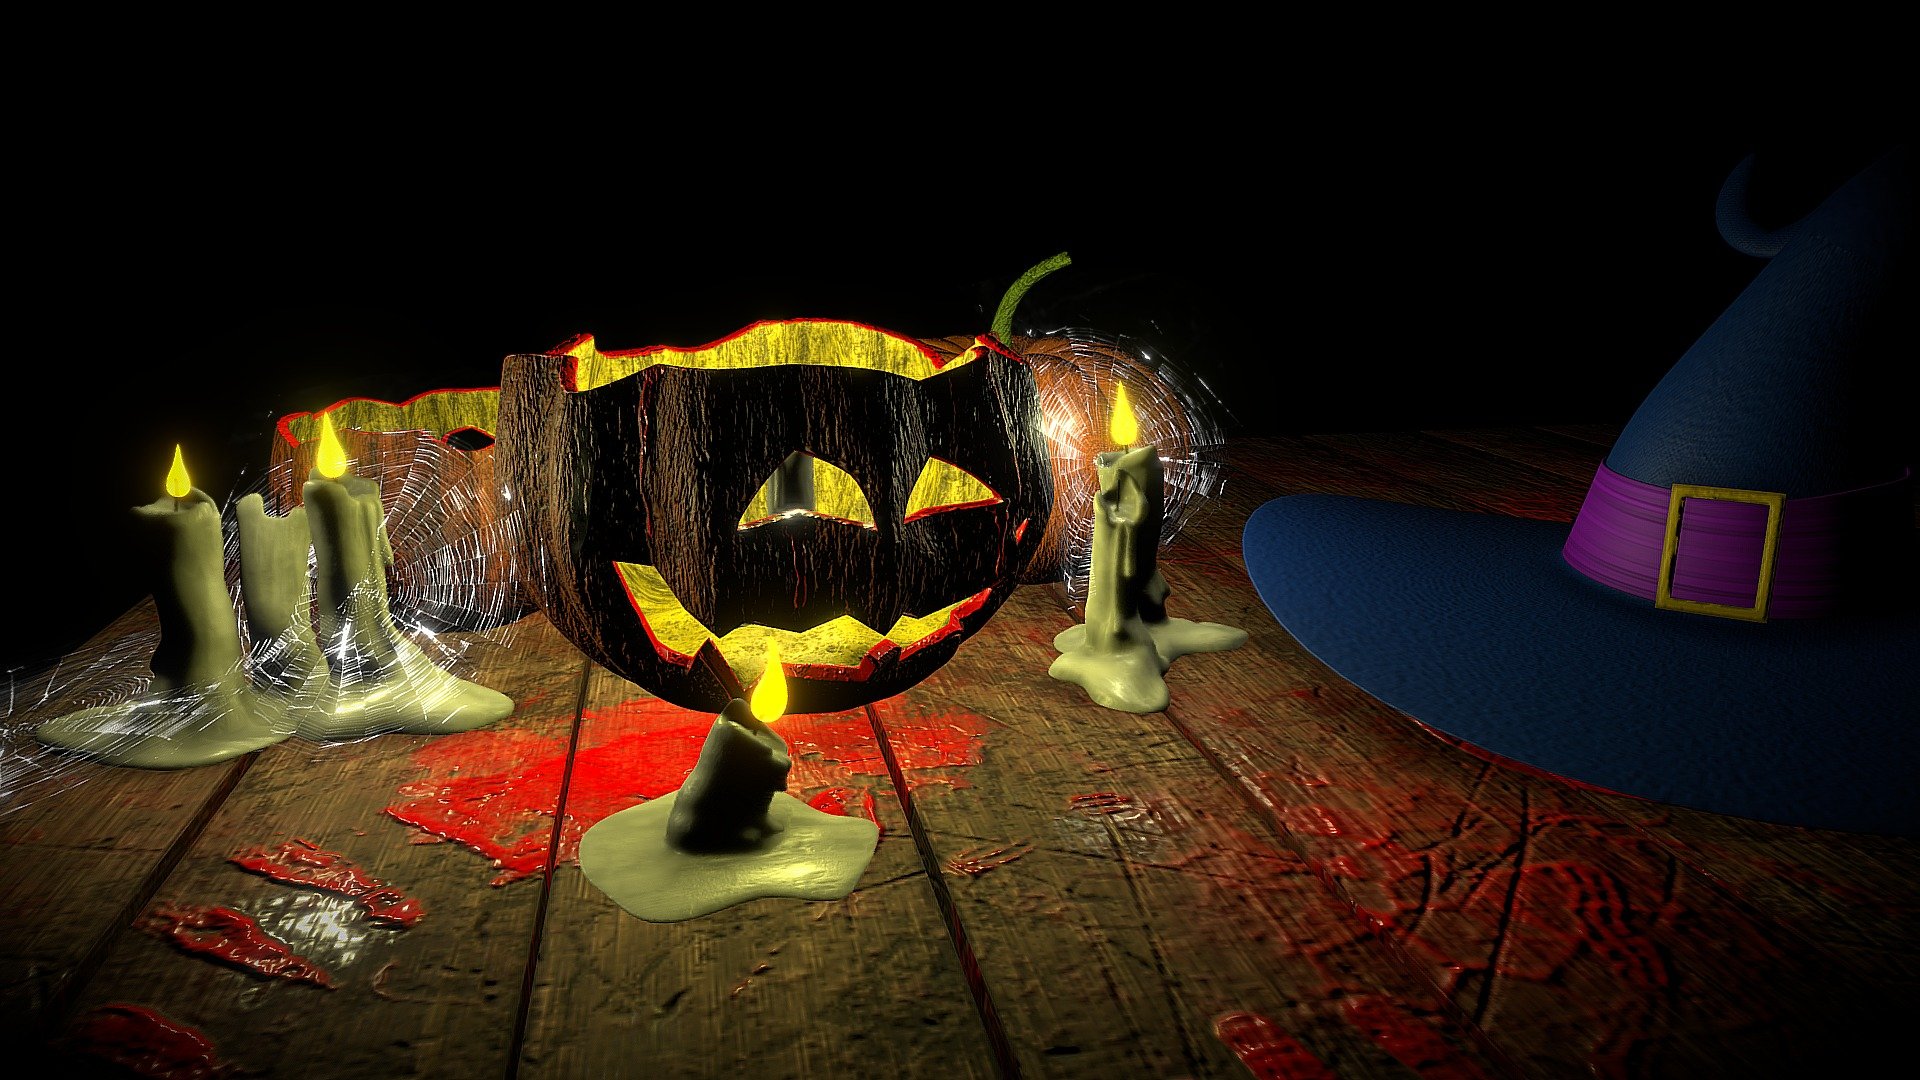 Halloween table for study purpose.
3DS Max + Substance Painter 2 (2017.3)

(there are some bugs - cause of SketchFab - on the pumpkin, try to fix it asap) - Halloween table - 3D model by Davy Chang (@davy.chang.fr) 3d model